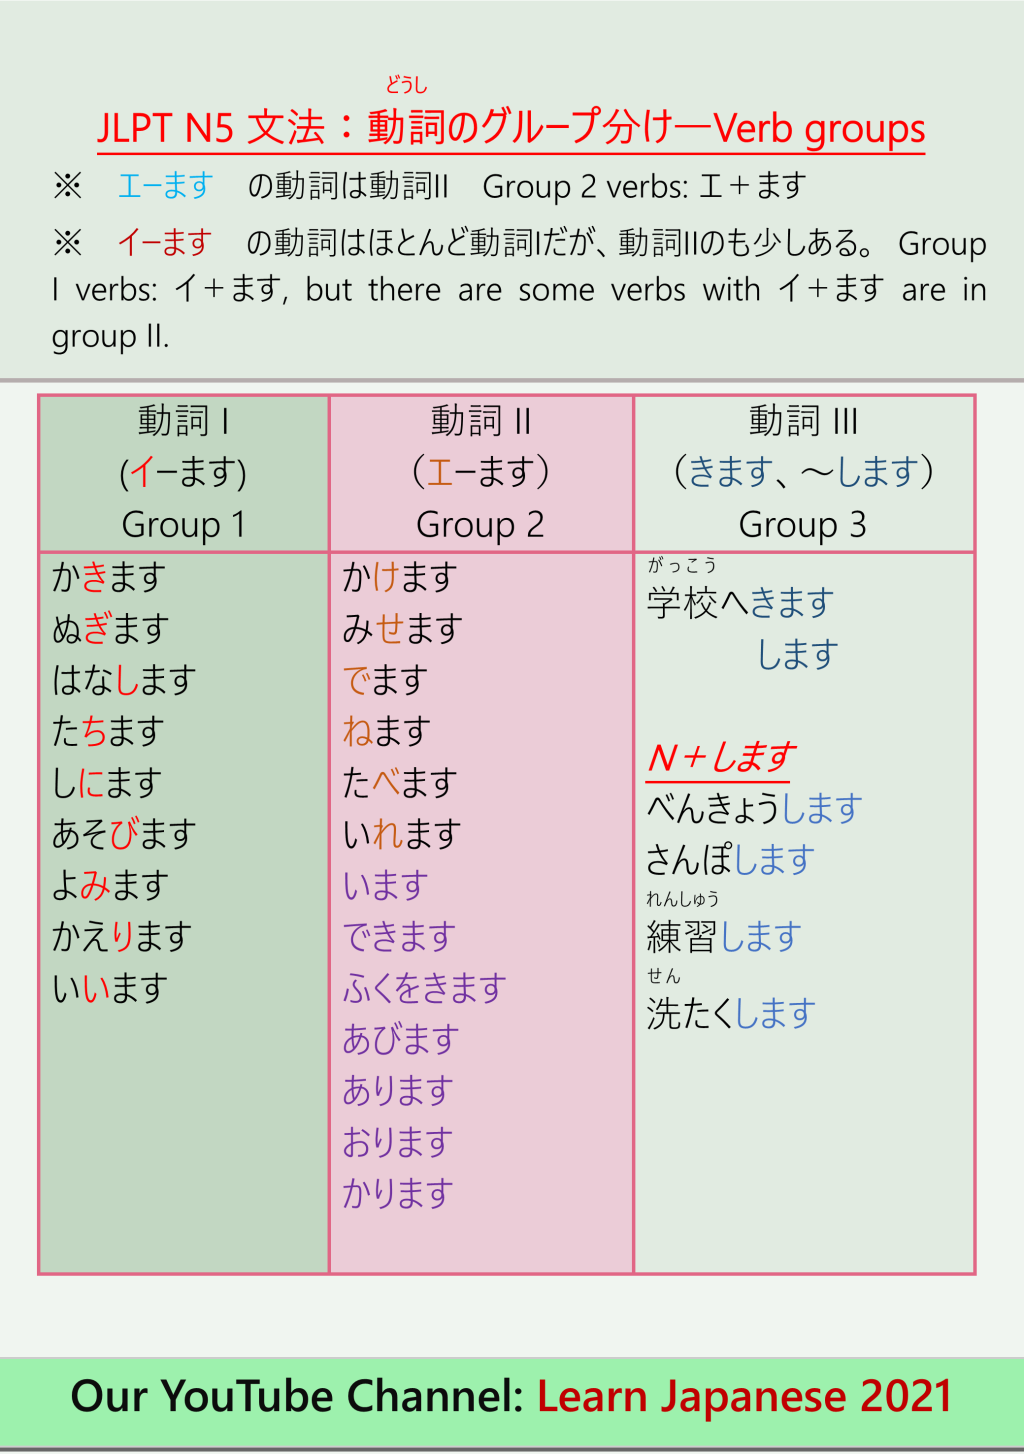 JLPT N5 文法：動詞のグループ分け―Verb groups